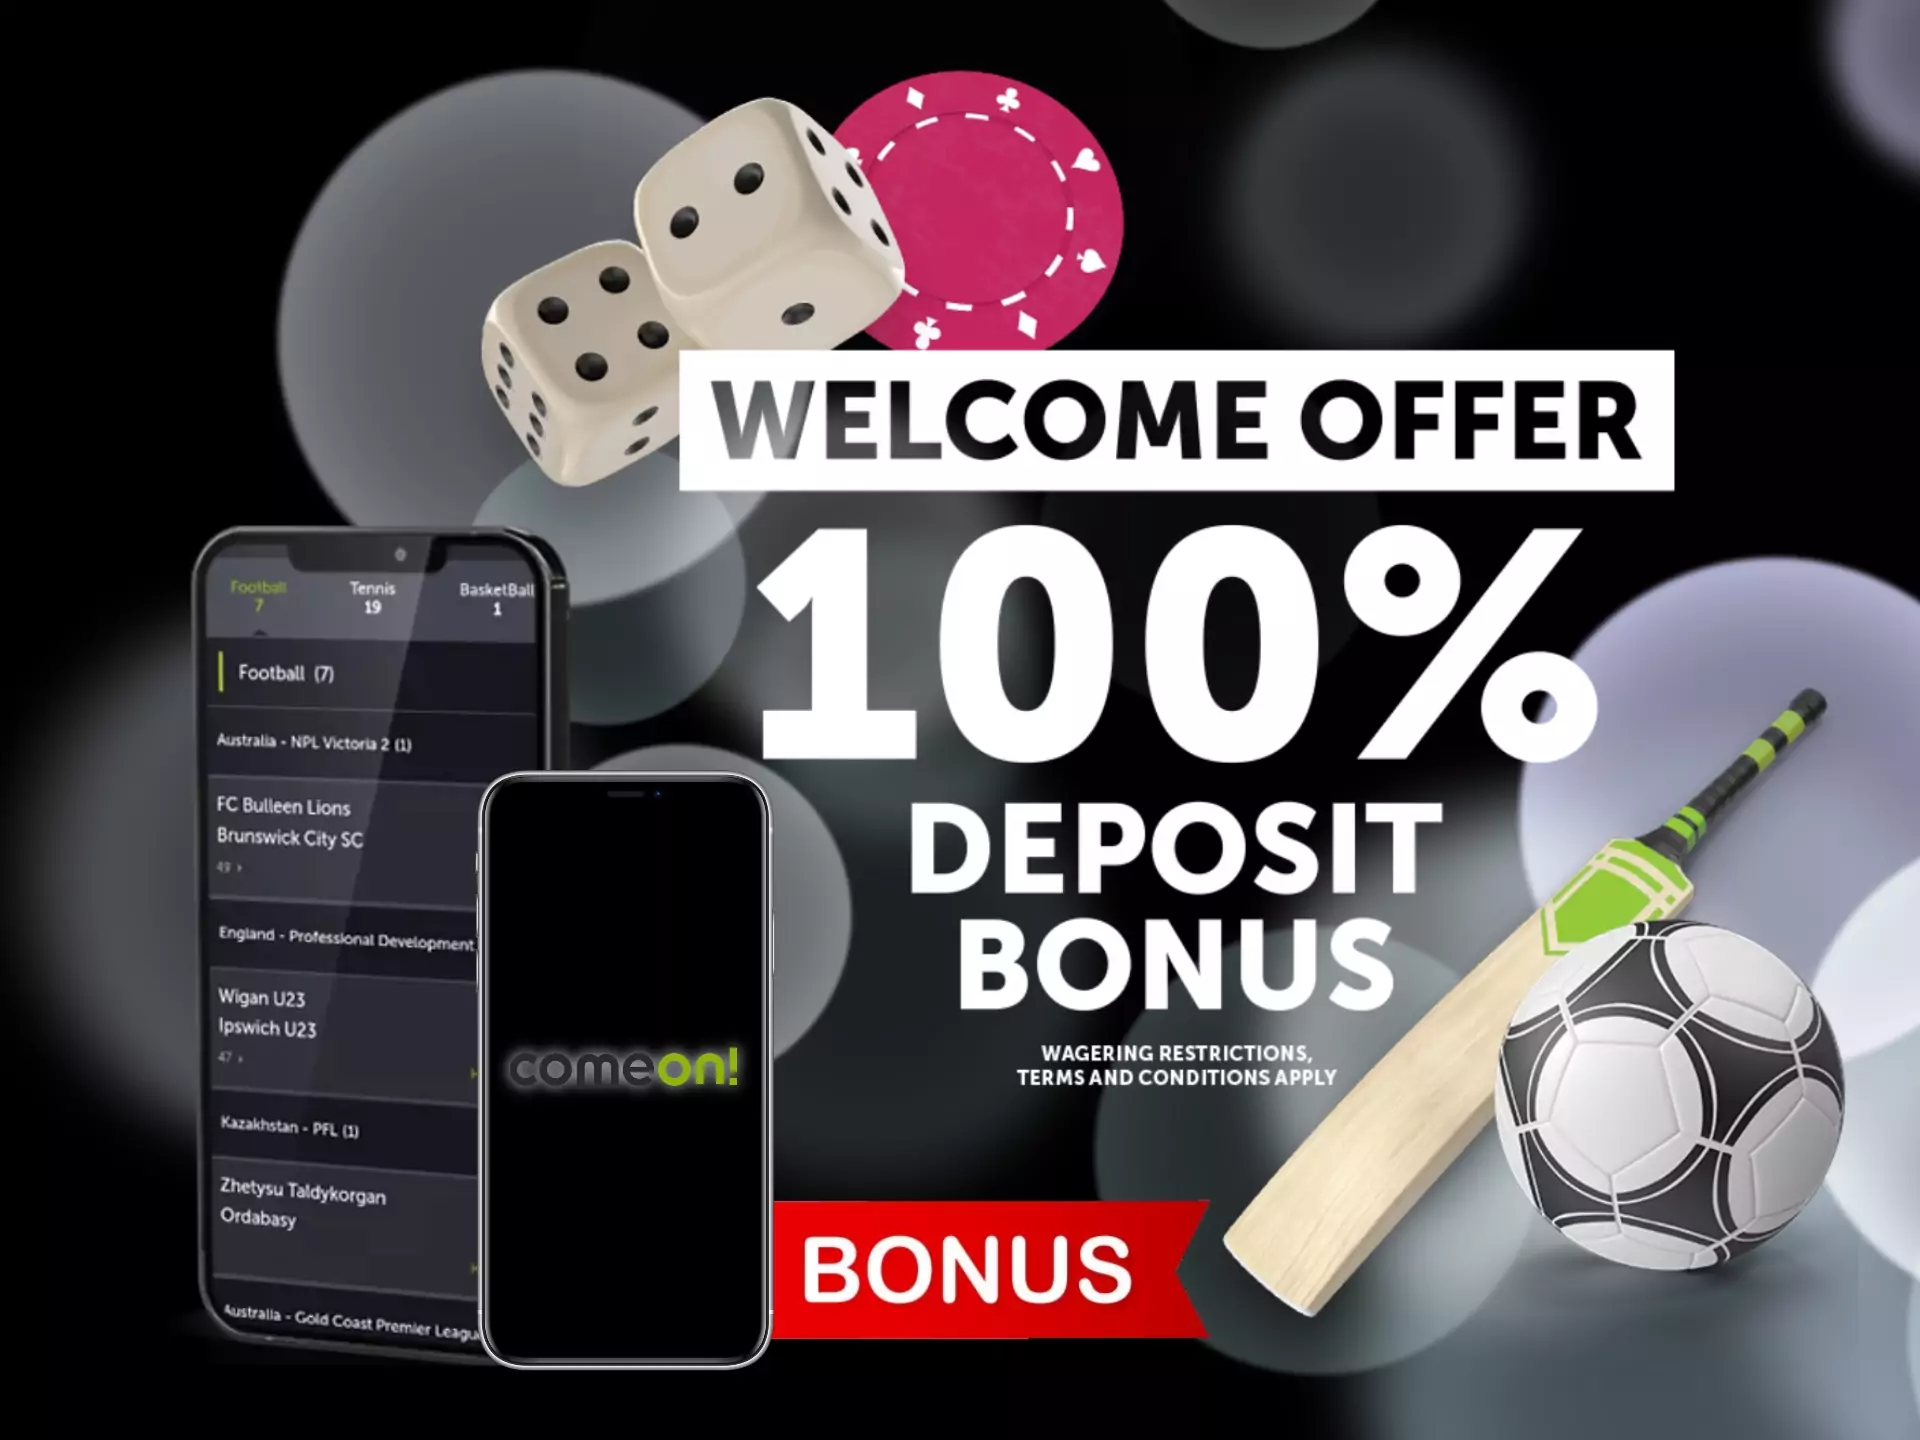 After the first deposit you will receive the ComeOn welcome bonus.